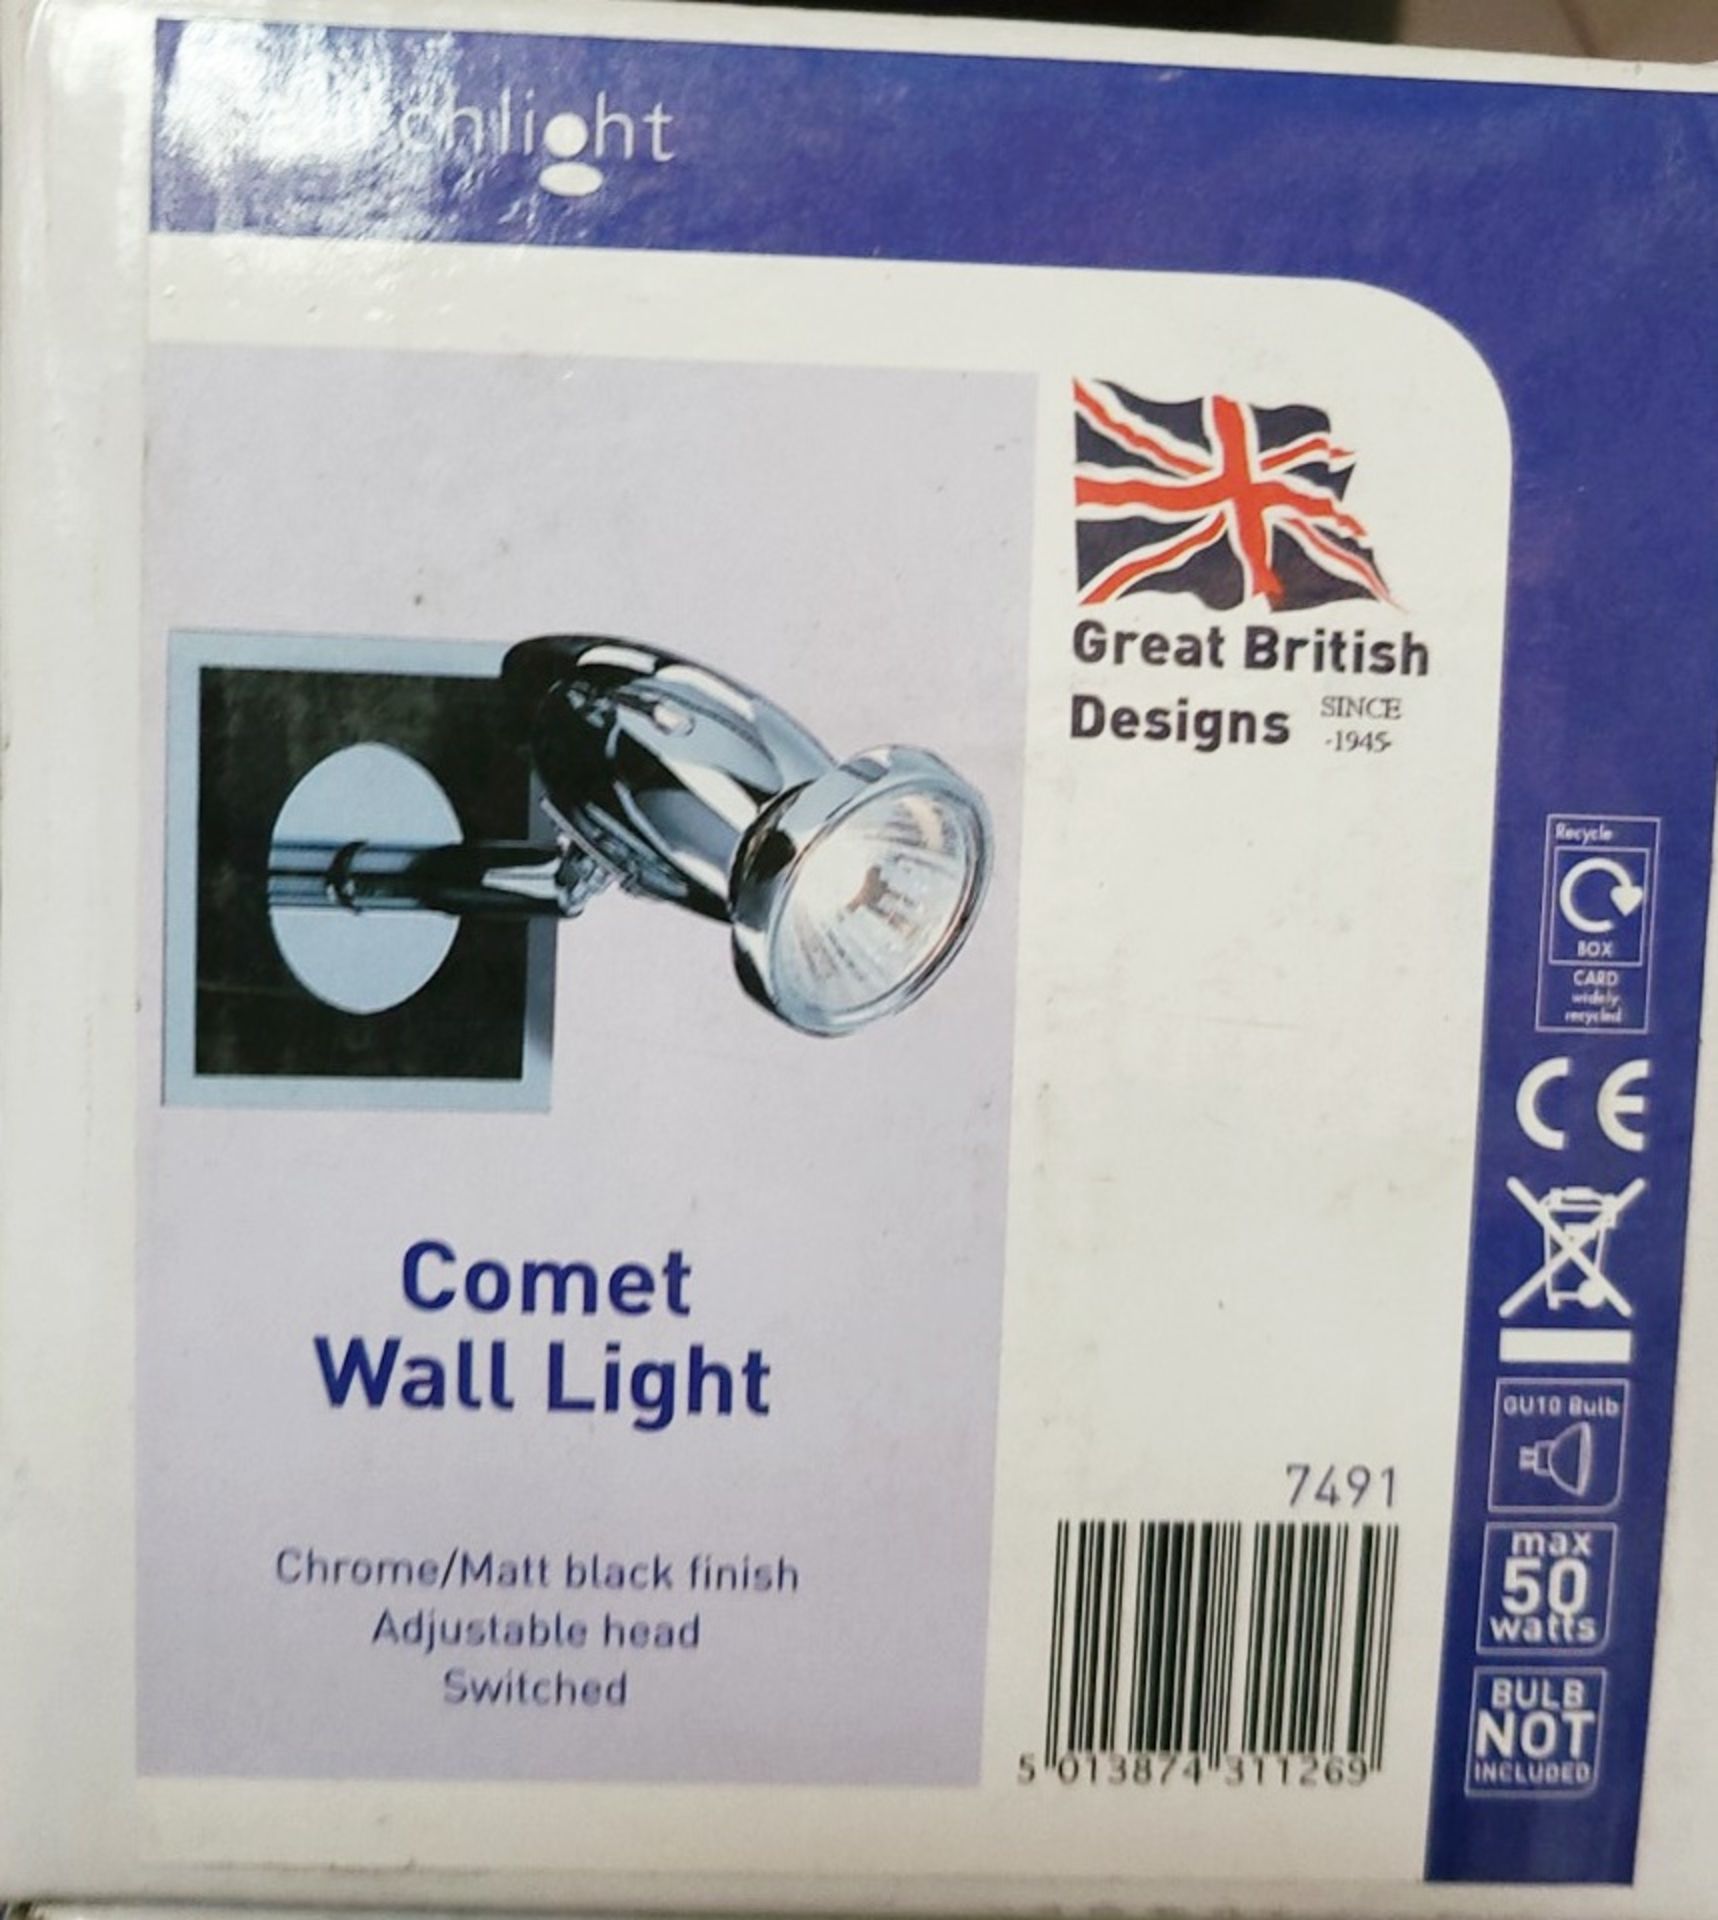 2 x SEARCHLIGHT Comet Wall Light With A Chrome & Black Finish With Adjustable Head and Flick Switch